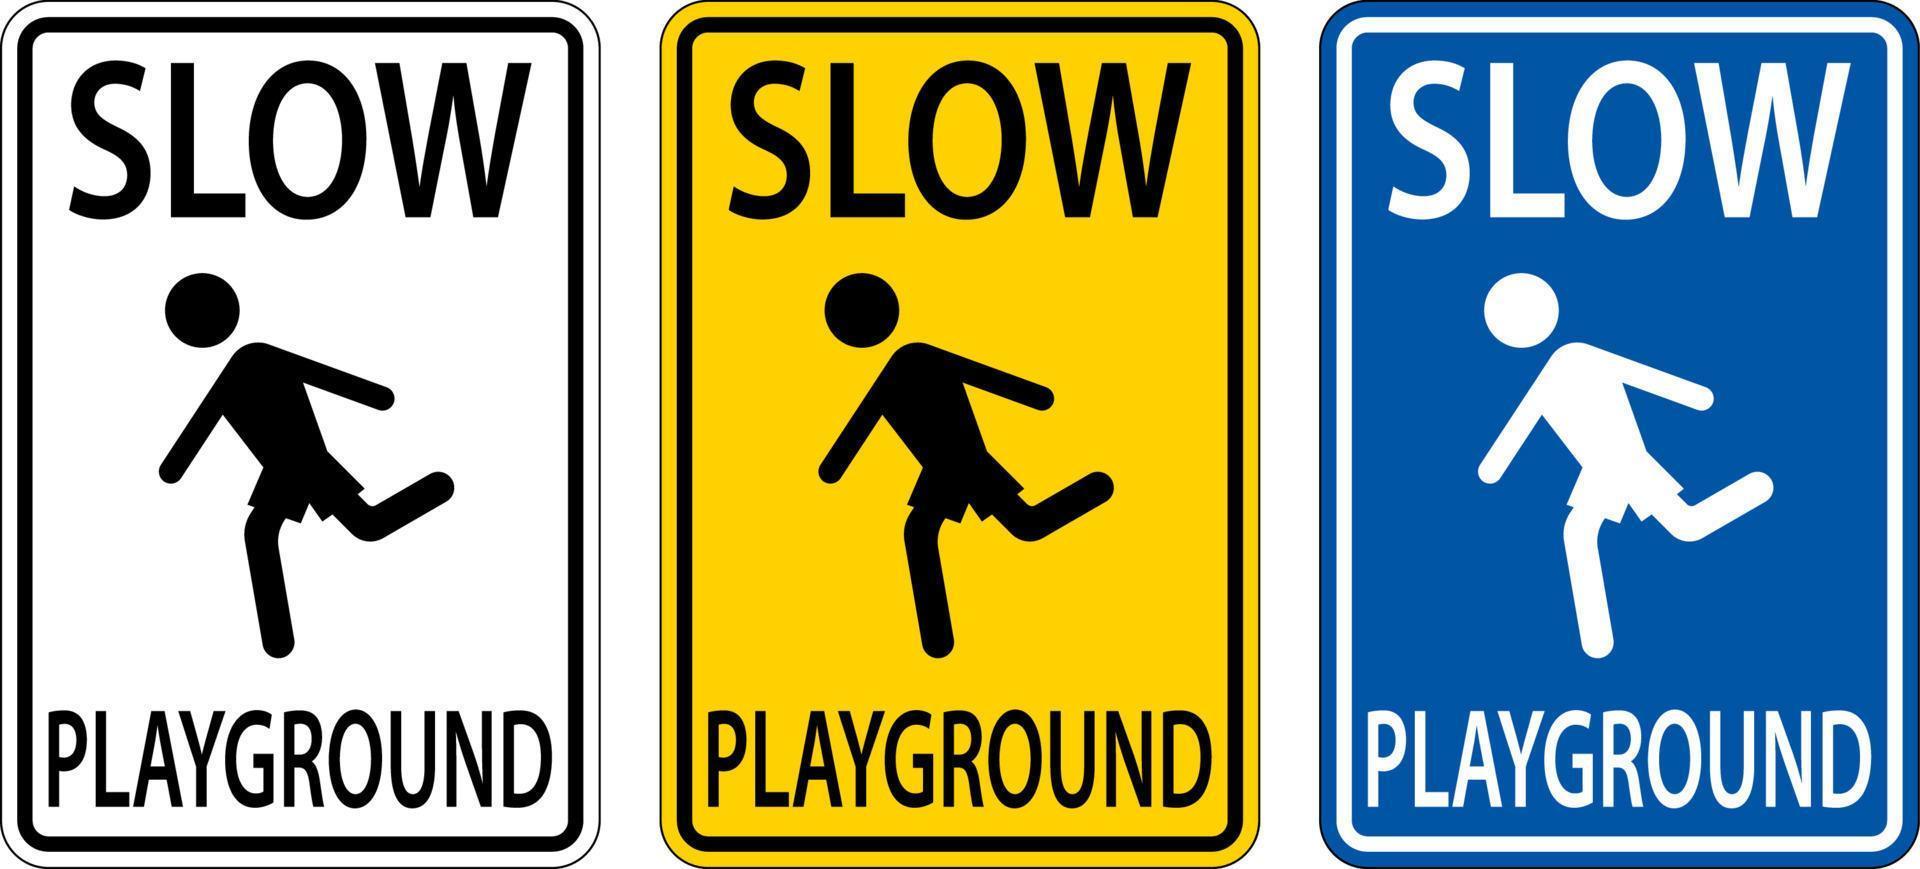 Slow Playground Sign On White Background vector